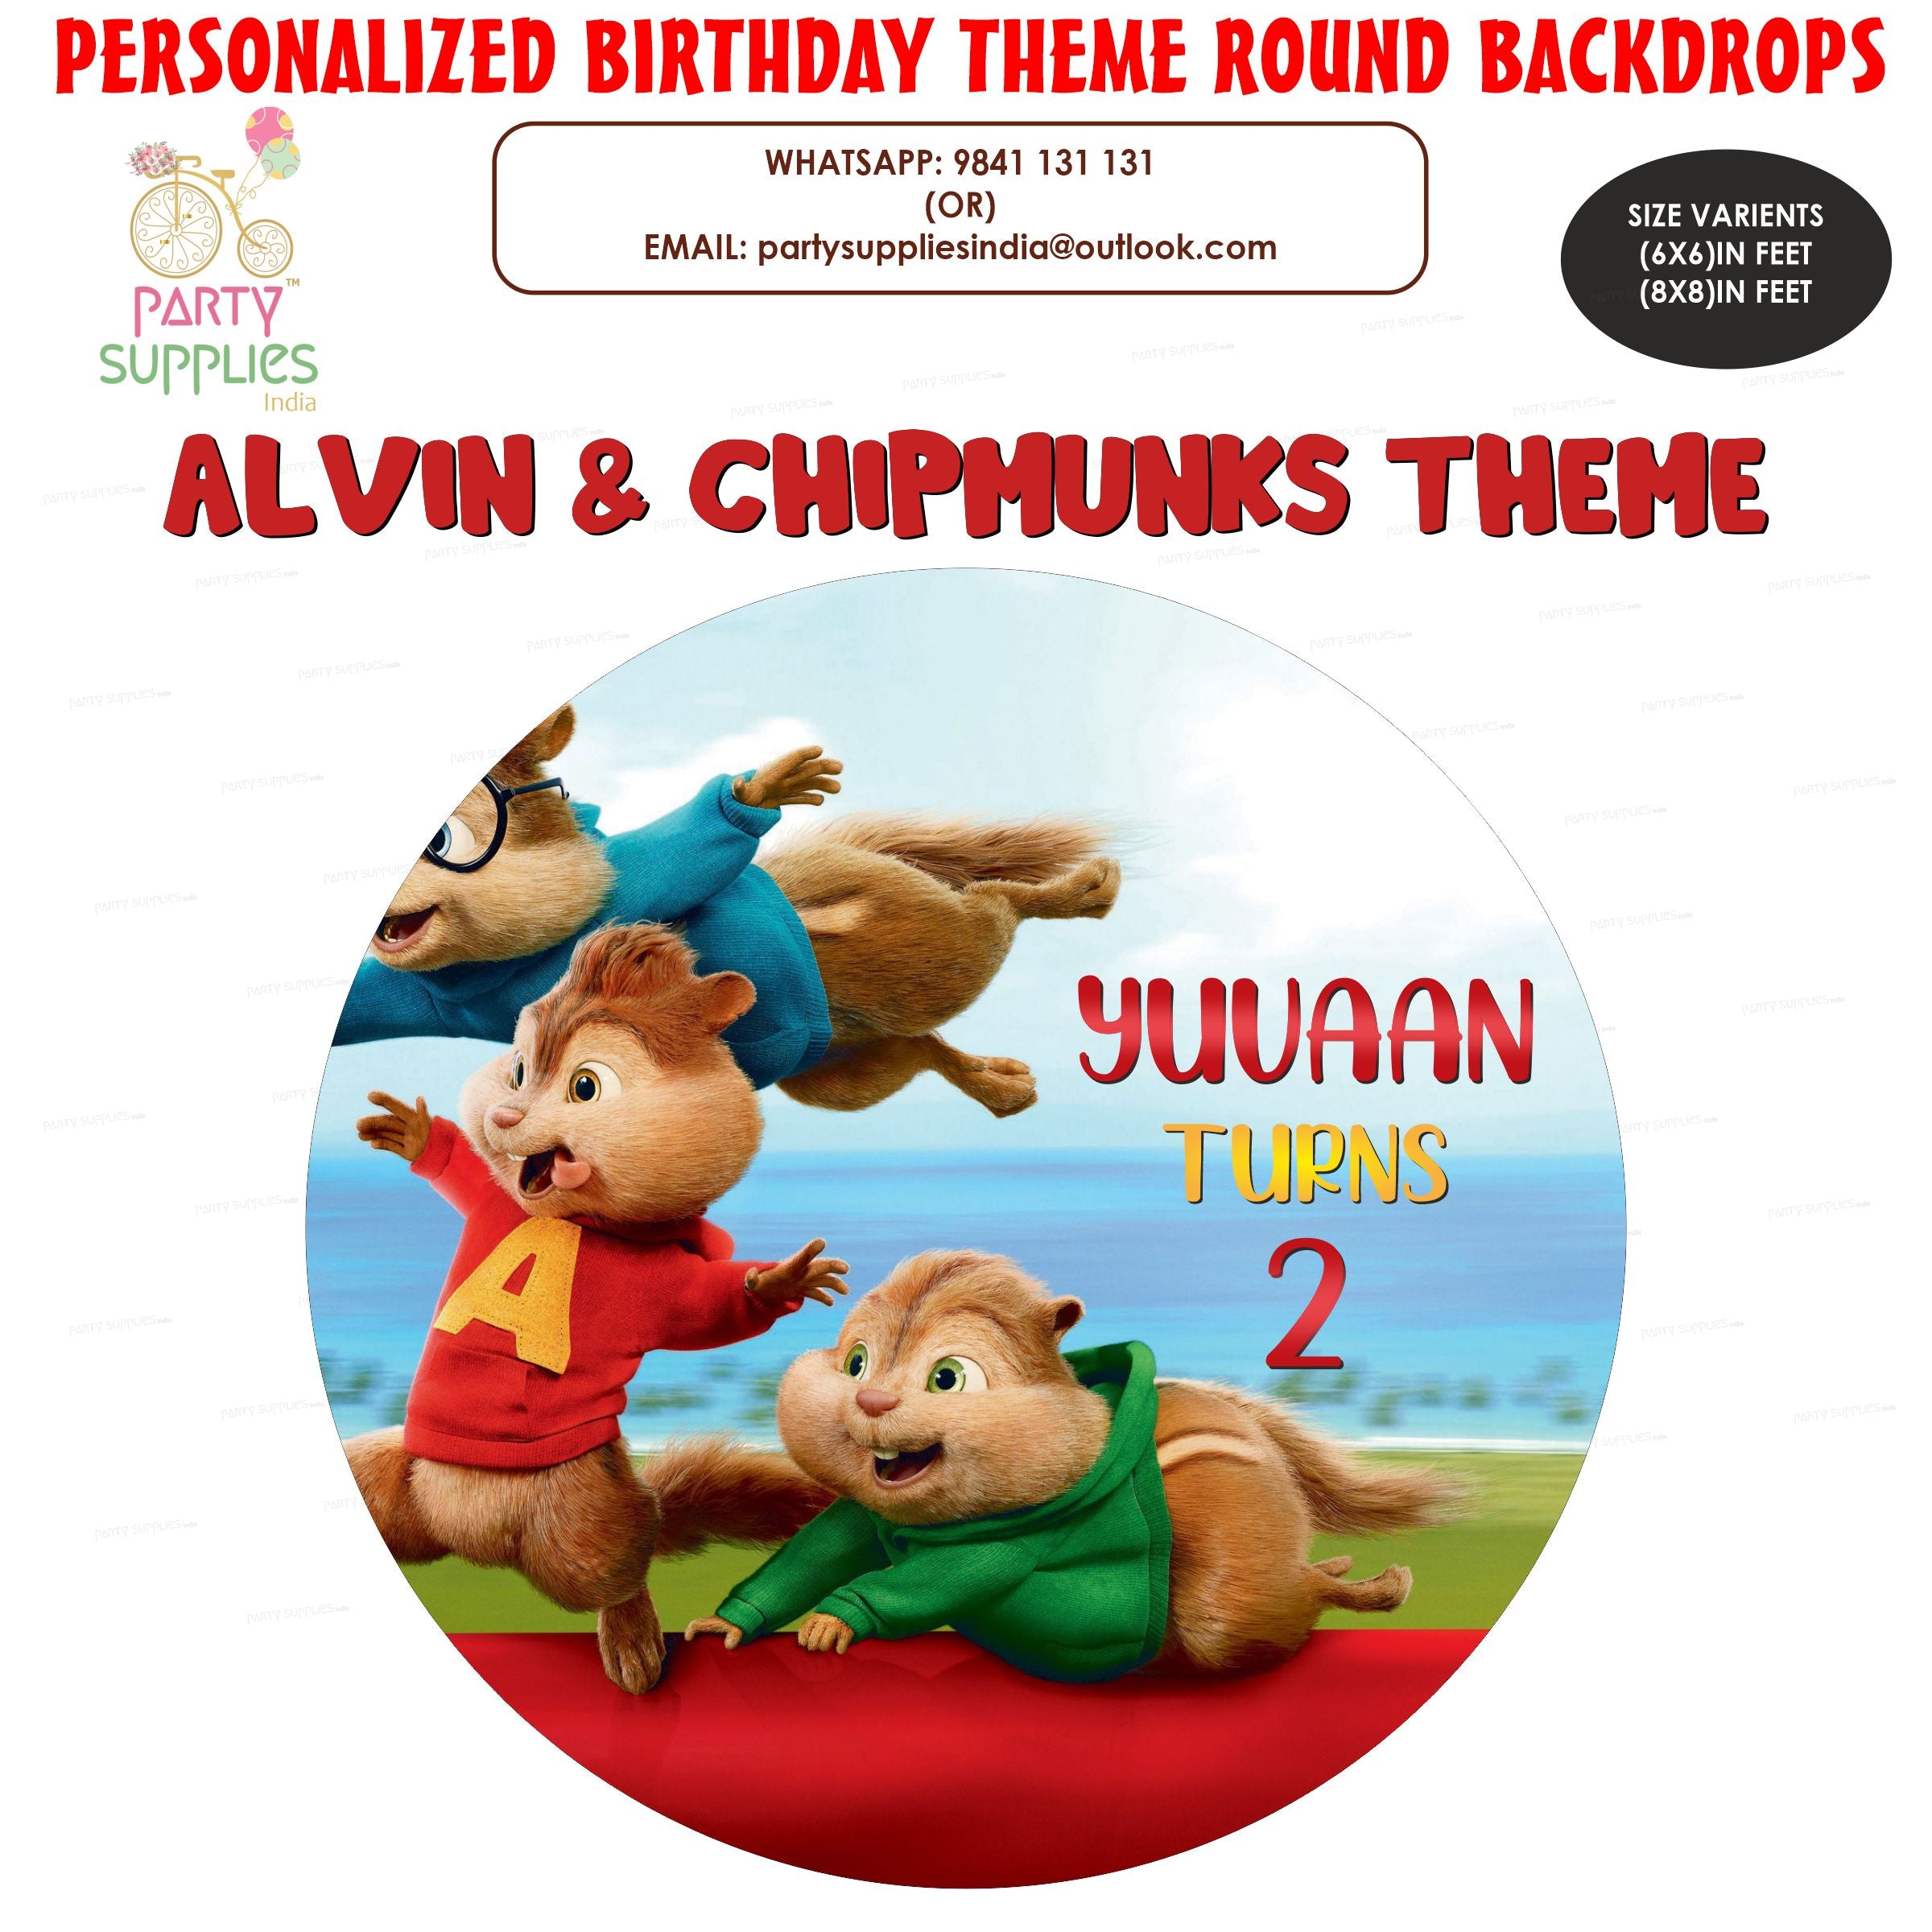 PSI Alvin and Chipmunks Theme Round Backdrop